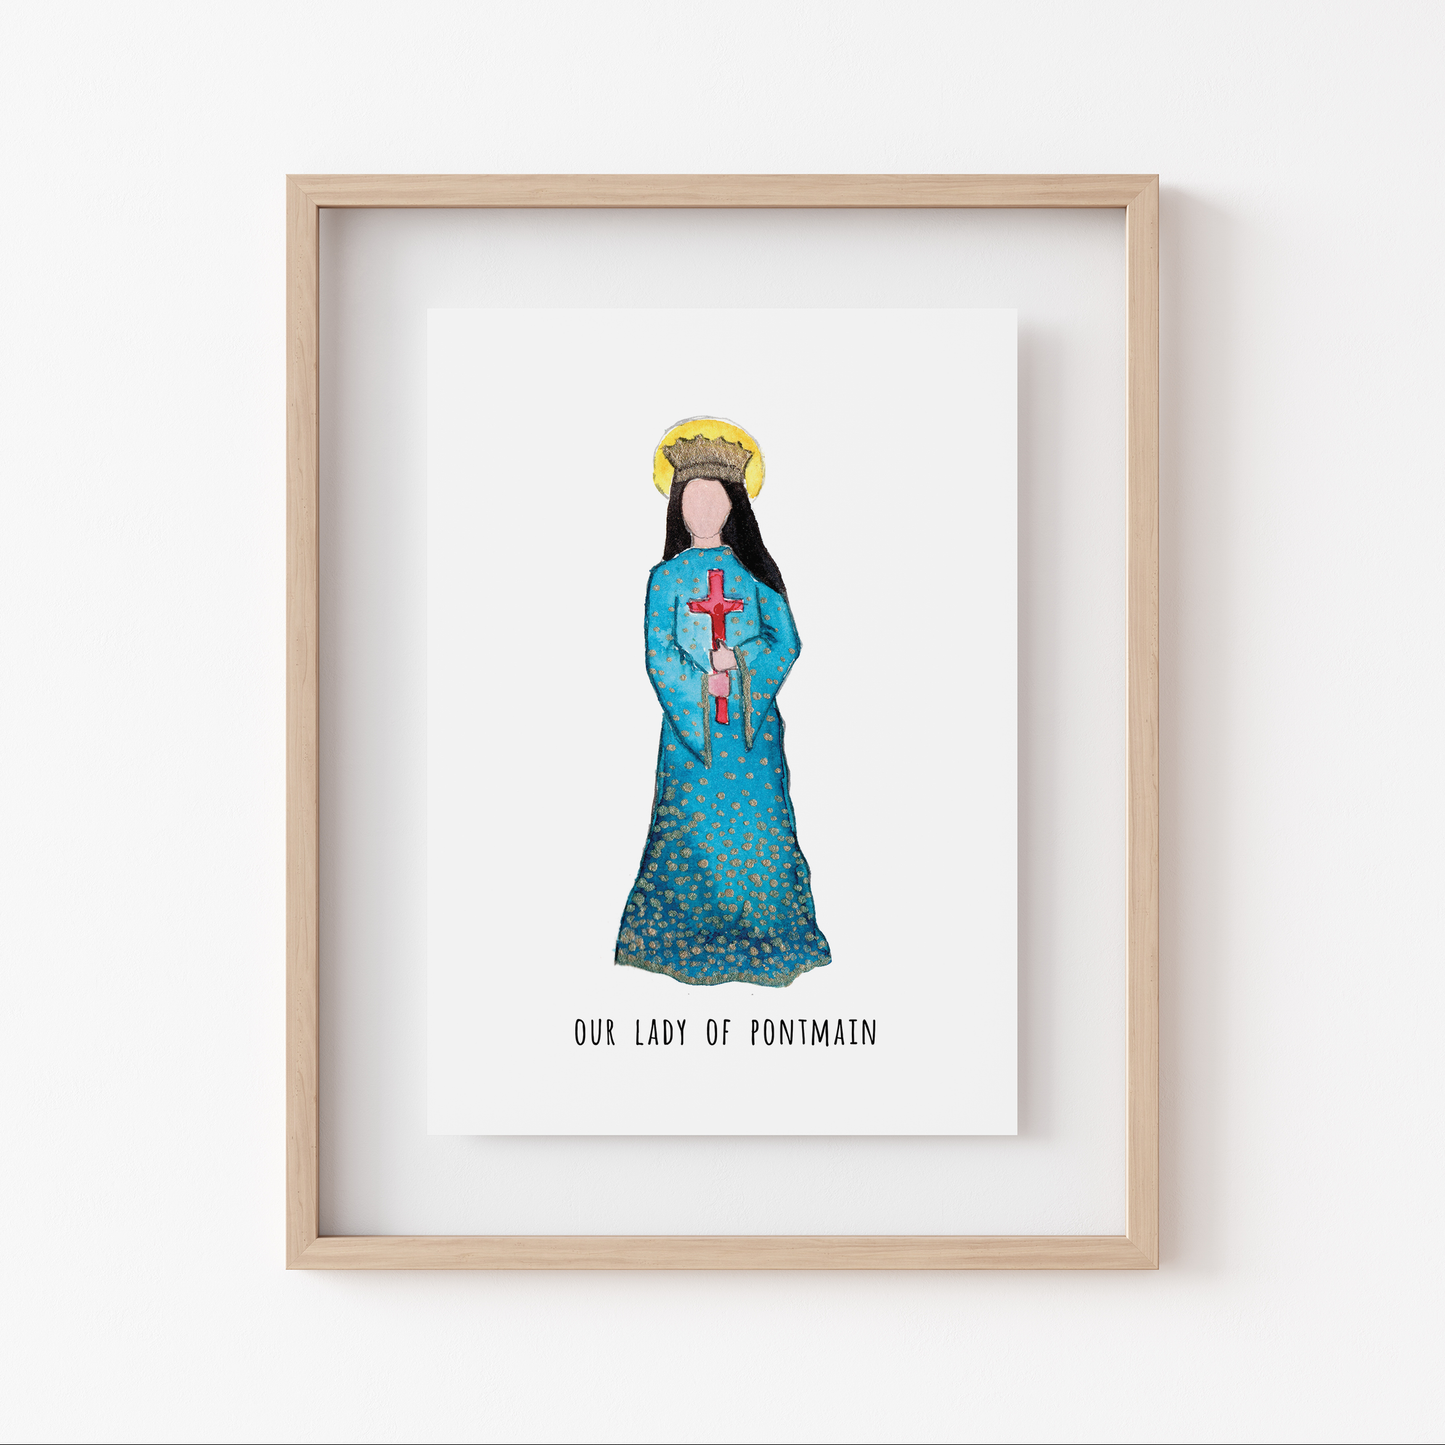 Marian Minis - Our Lady of Pontmain